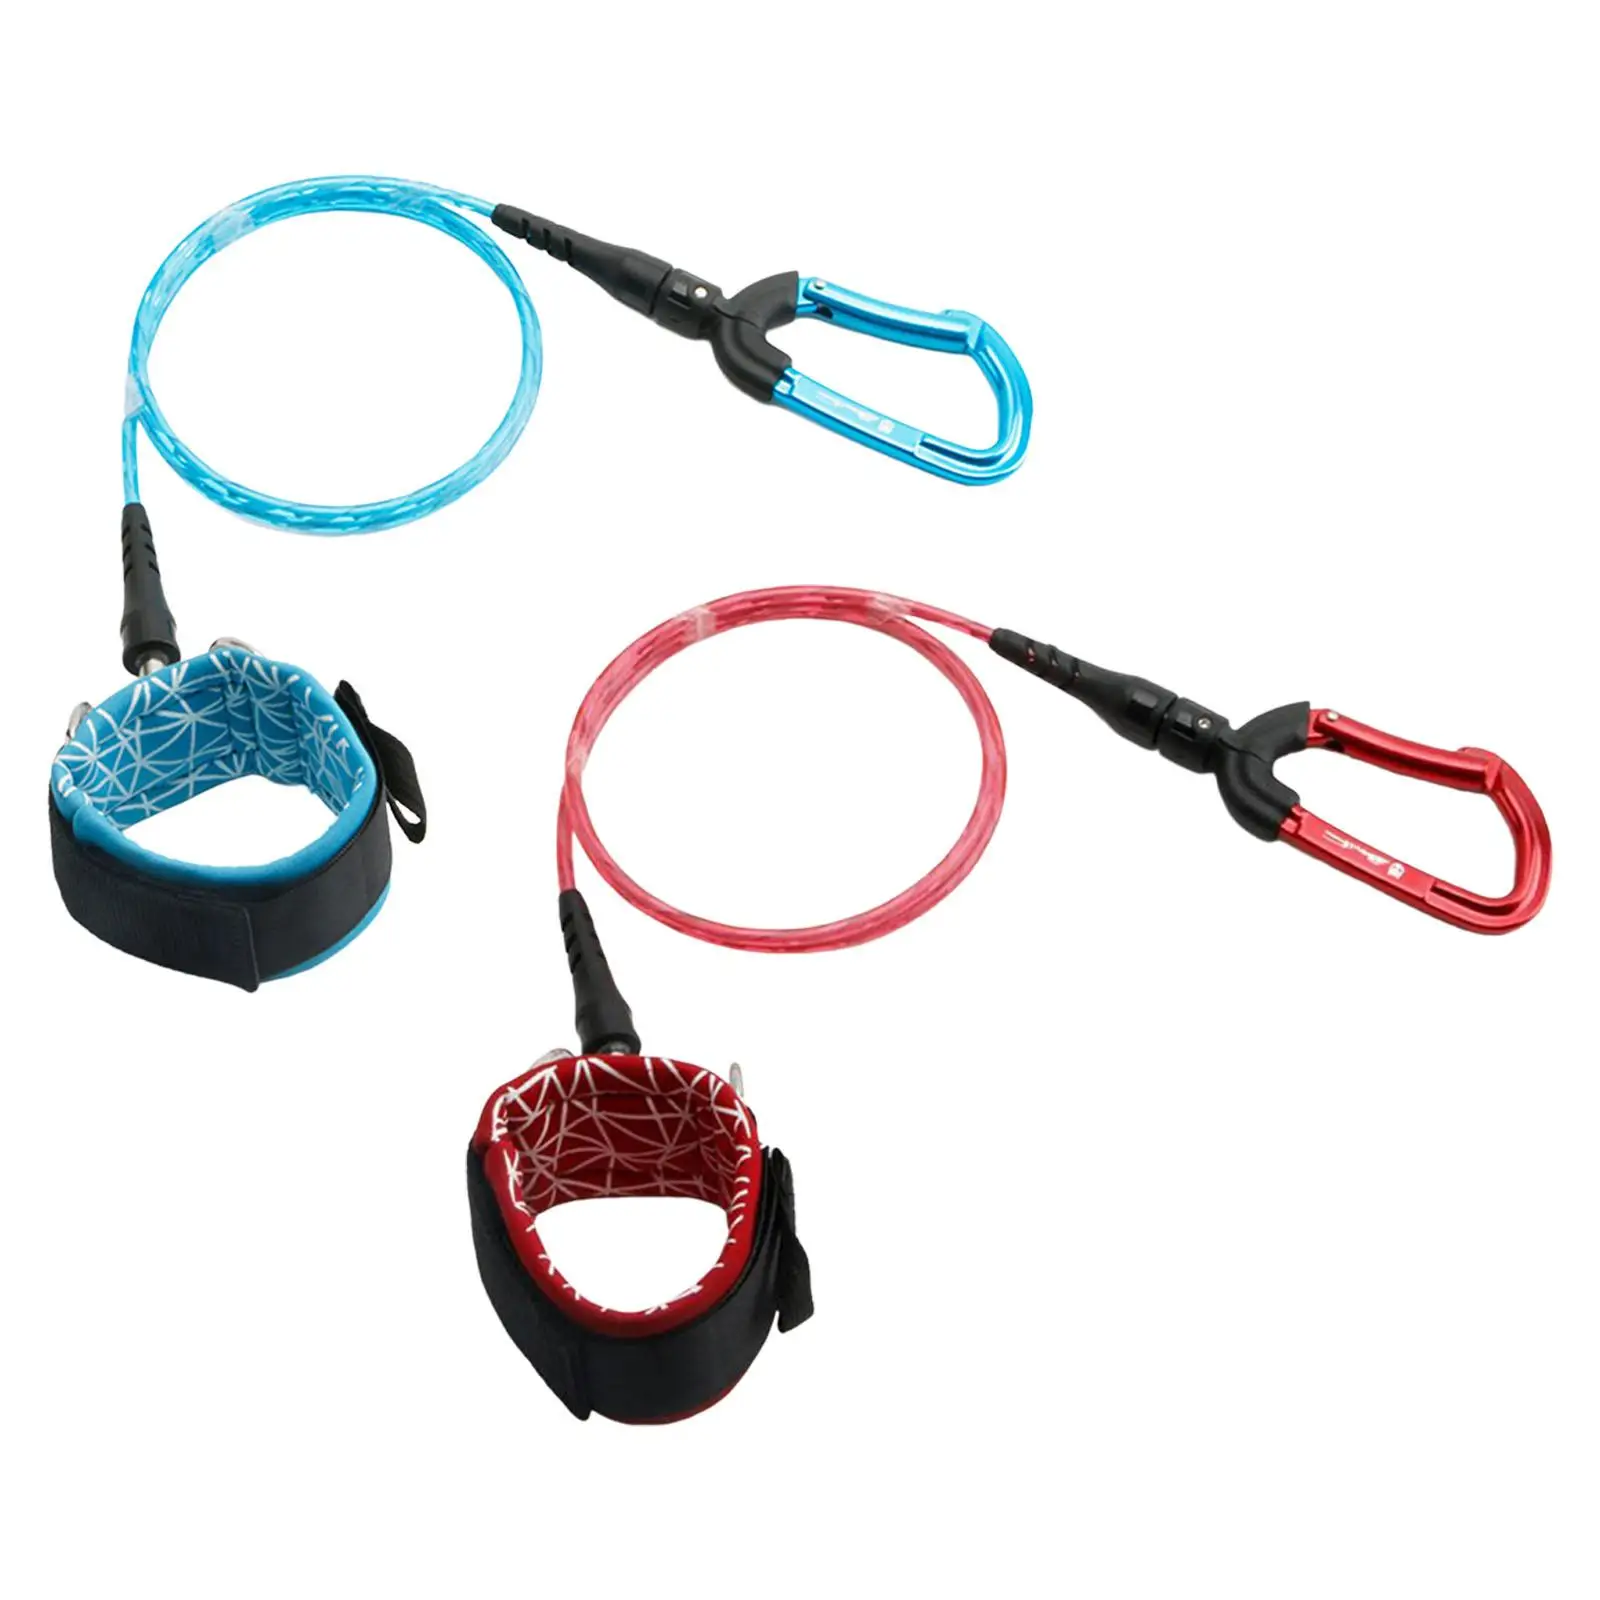 Freediving Lanyard Breaking Force 24kN Adjustable Fit for Underwater Sports